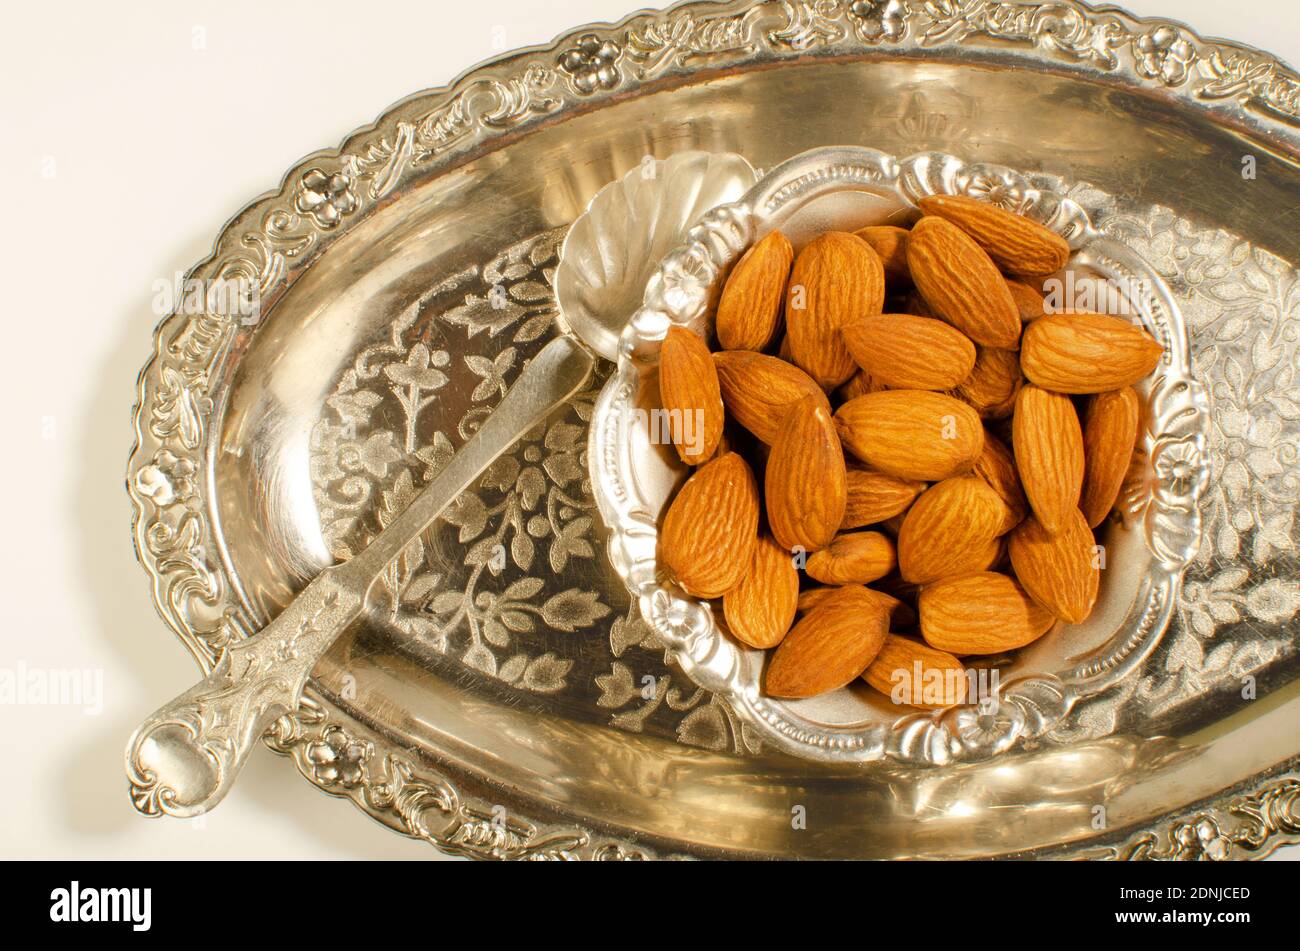 Almonds or Badam dried Fruit presented in a decorative Silver Bowl. Studio Shot Stock Photo